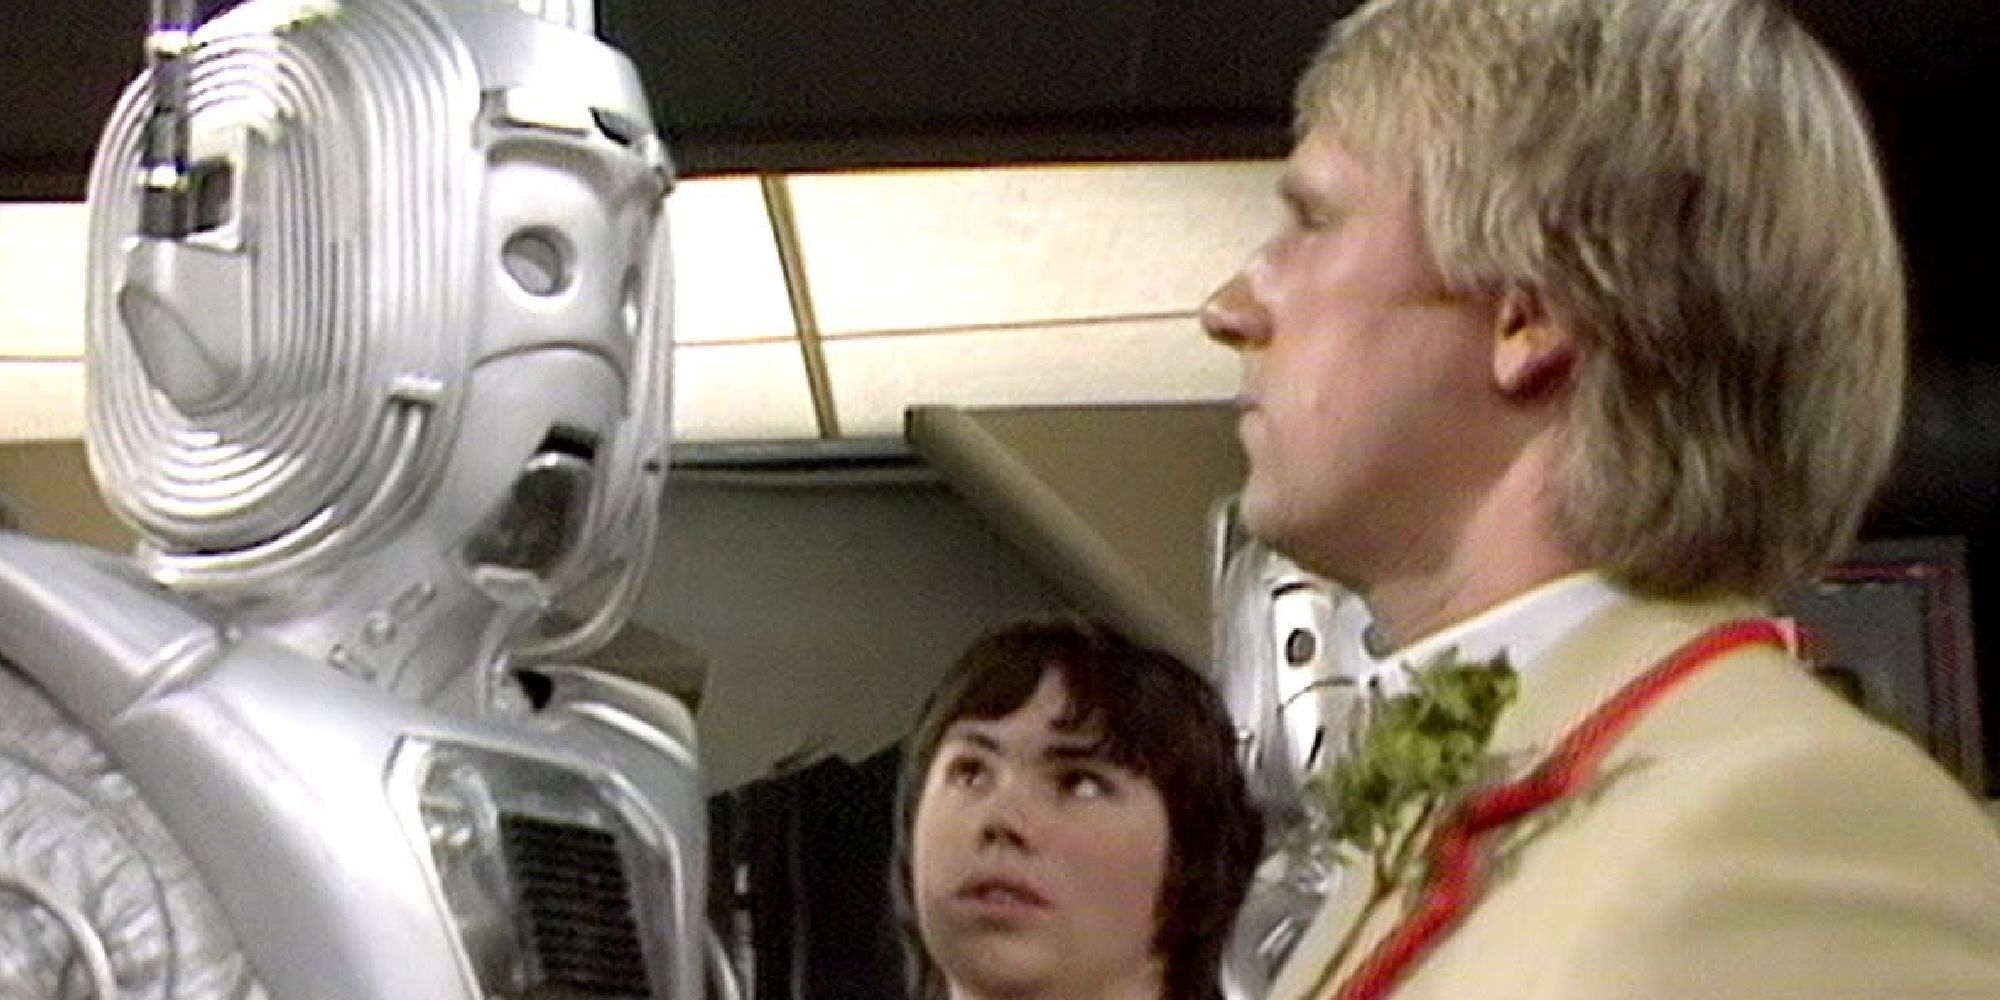 The 5th Doctor and Adric face-to-face with a cyberman in Doctor Who's Earthshock